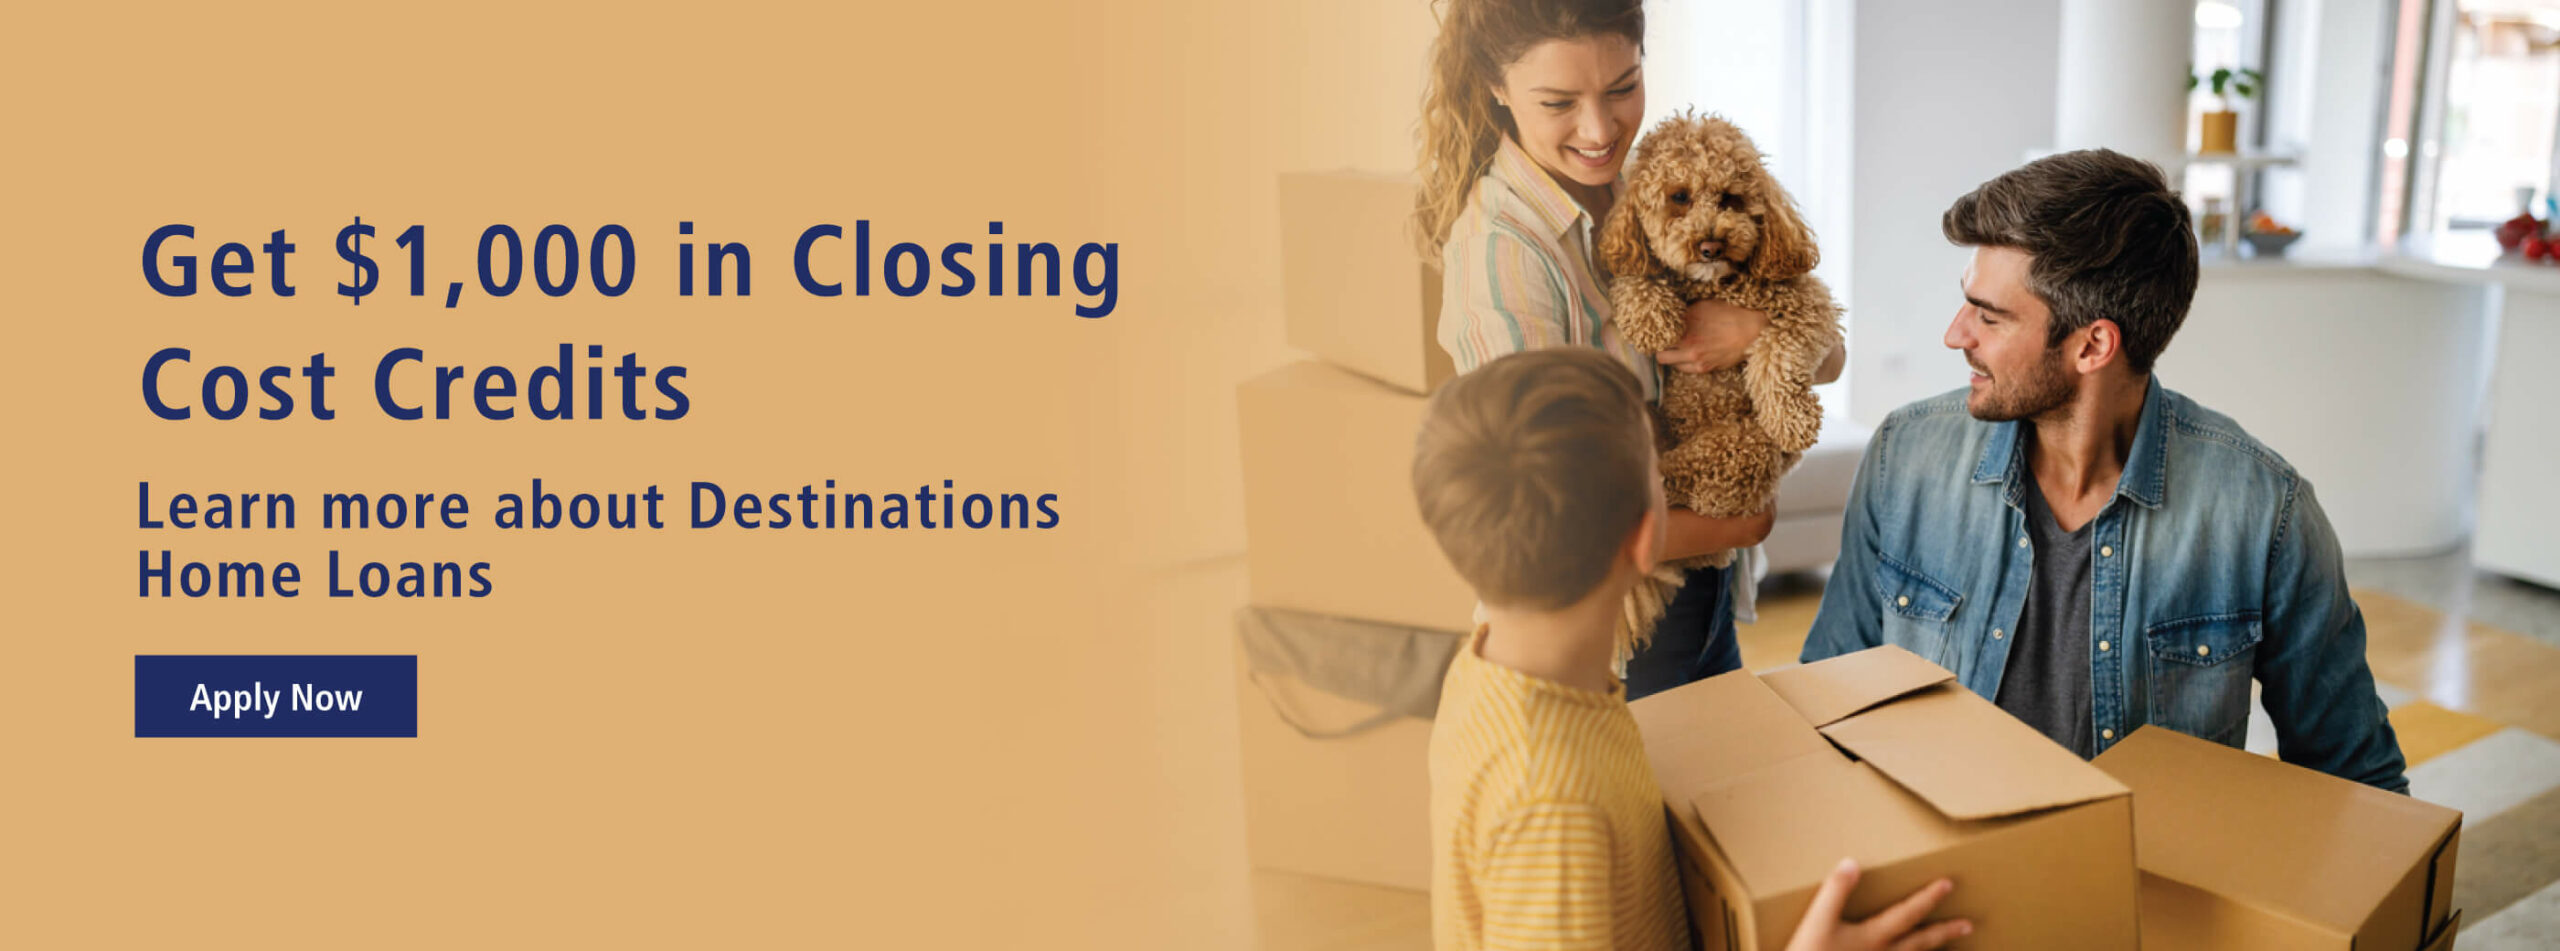 Get $1,000 in Closing Cost Credits with a Destinations Home Loan